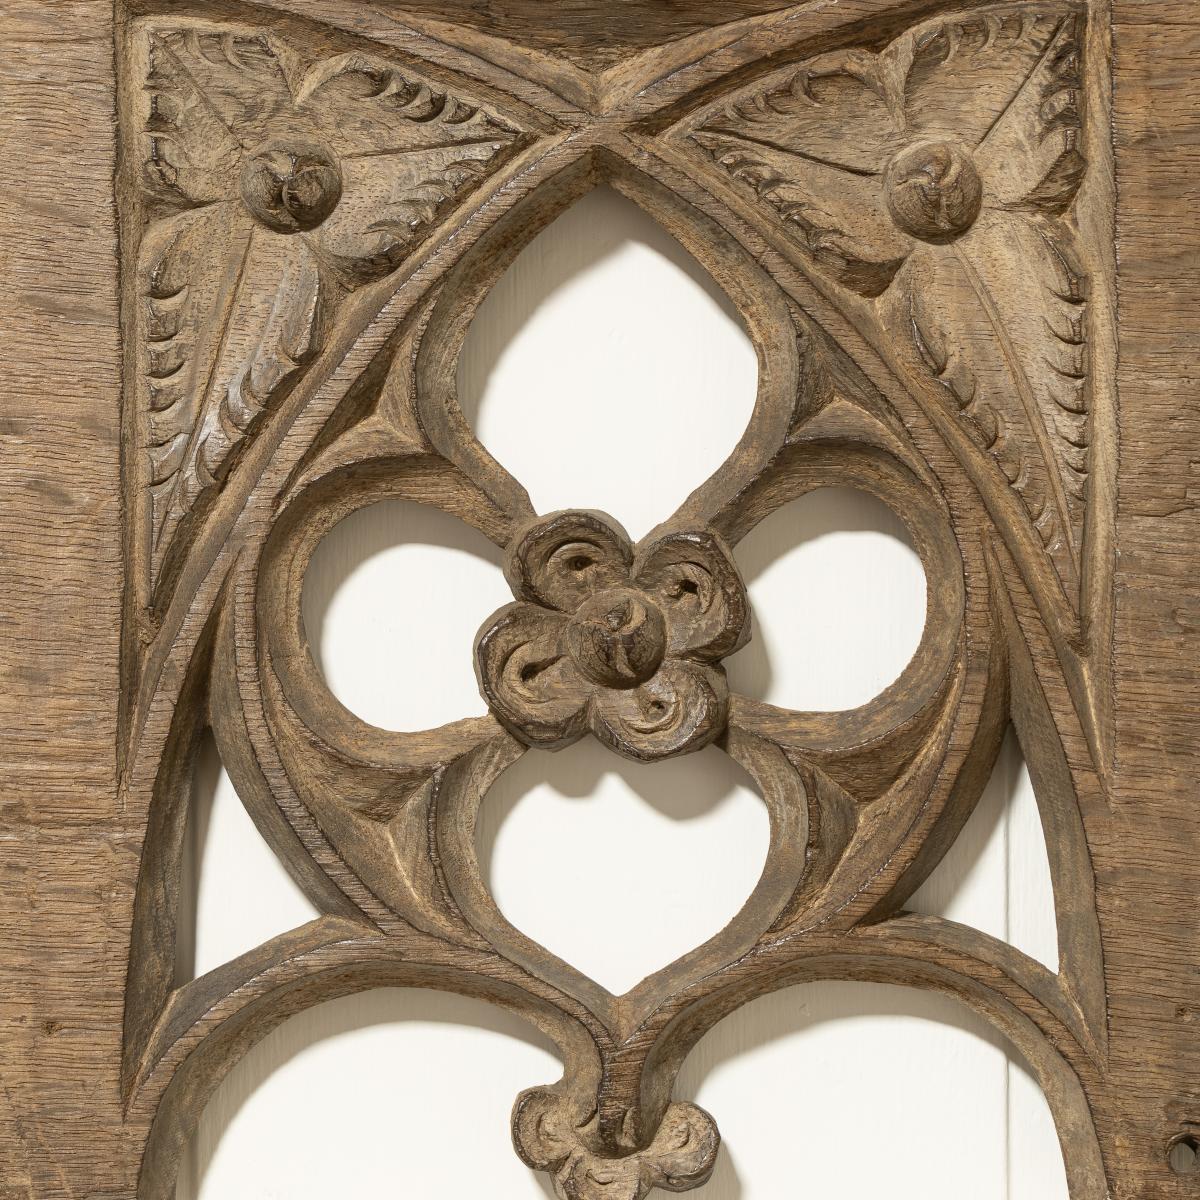 A 15th century oak tracery head, West Country, possibly Somerset, circa 1480